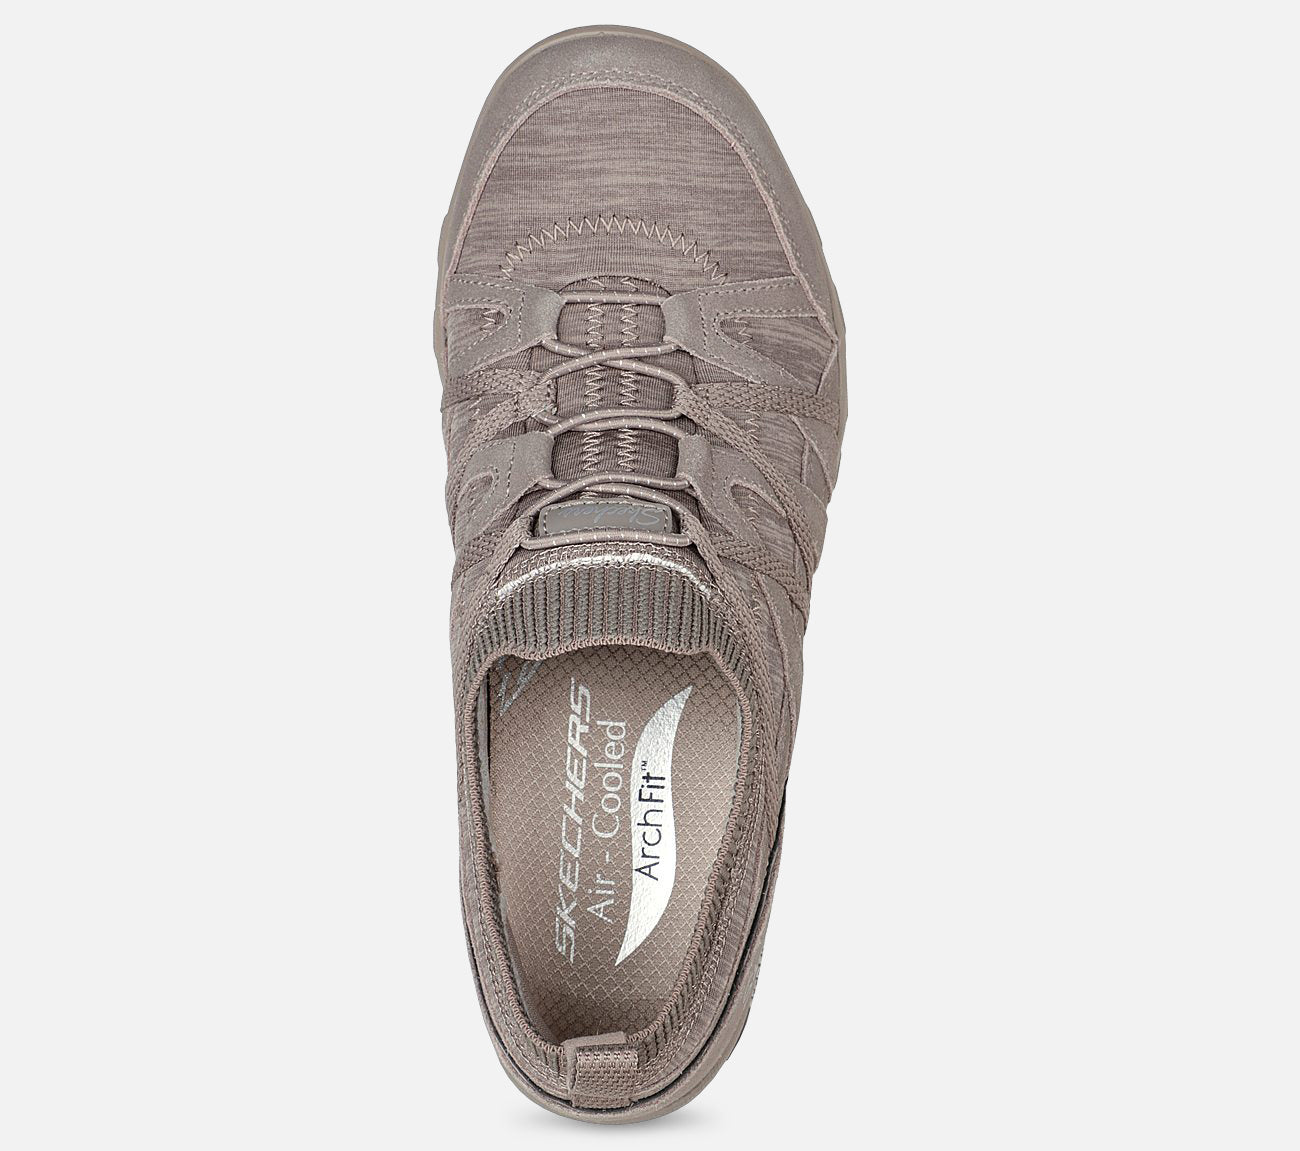 Relaxed Fit: Arch Fit Comfy Shoe Skechers